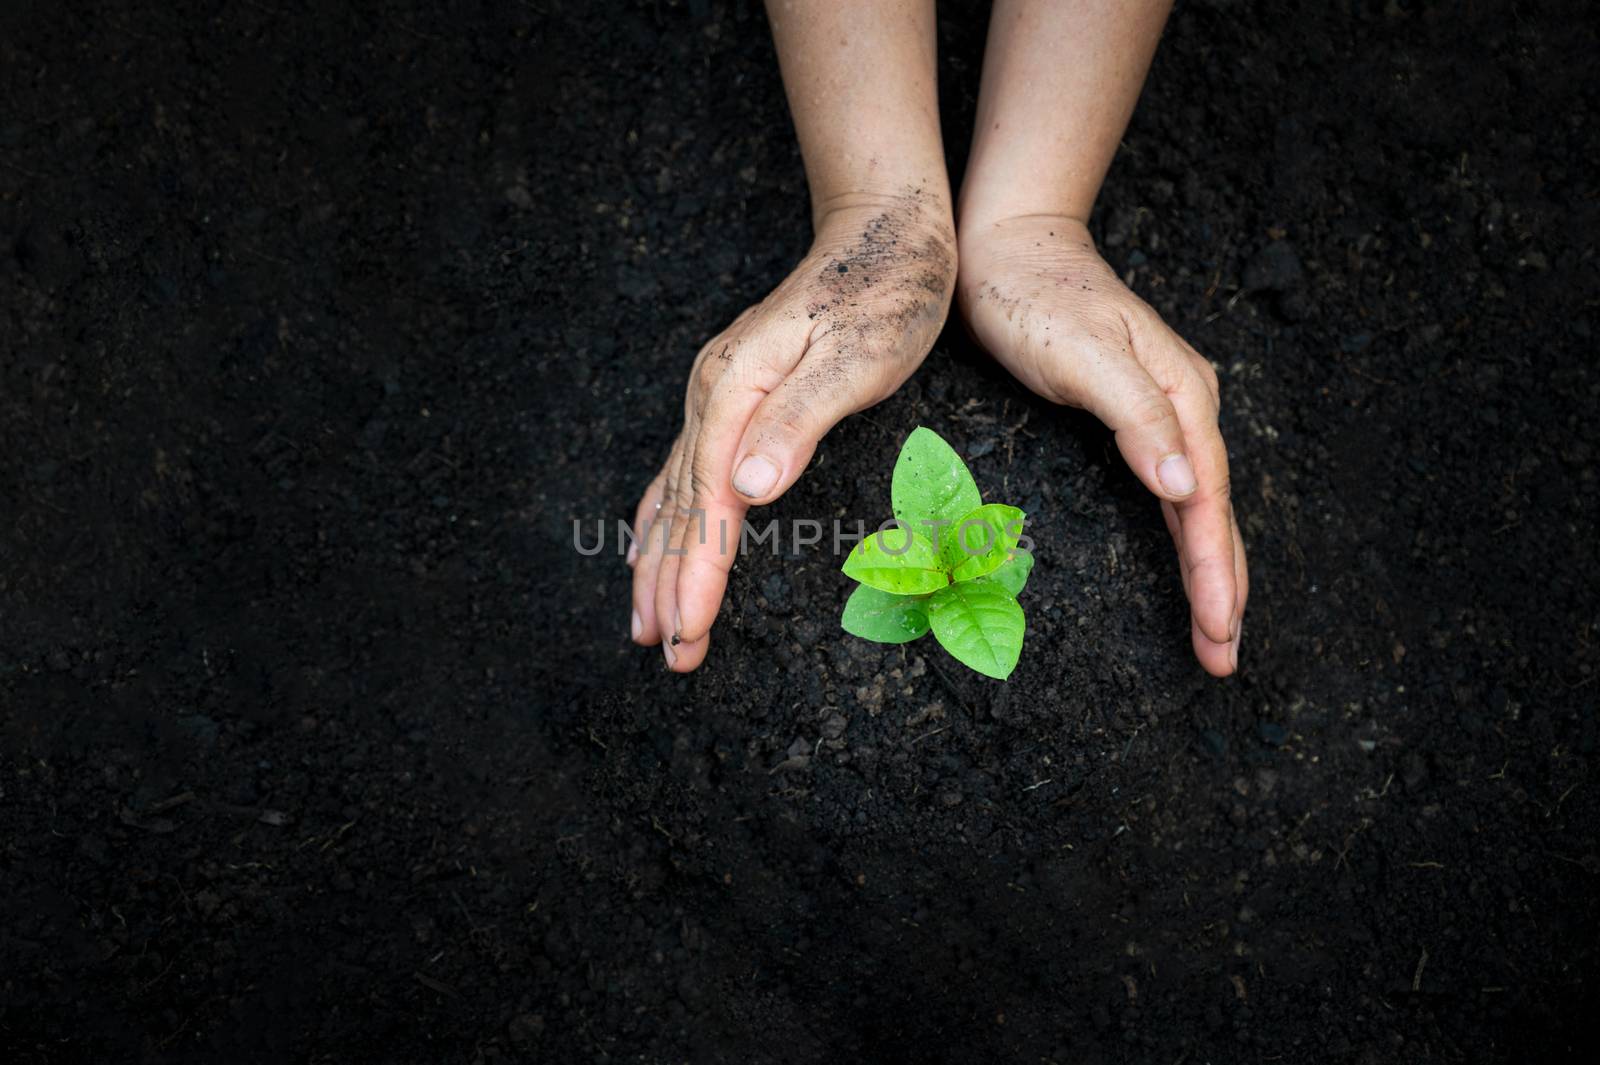 hand Watering plants tree mountain green Background Female hand holding tree on nature field grass Forest conservation concept